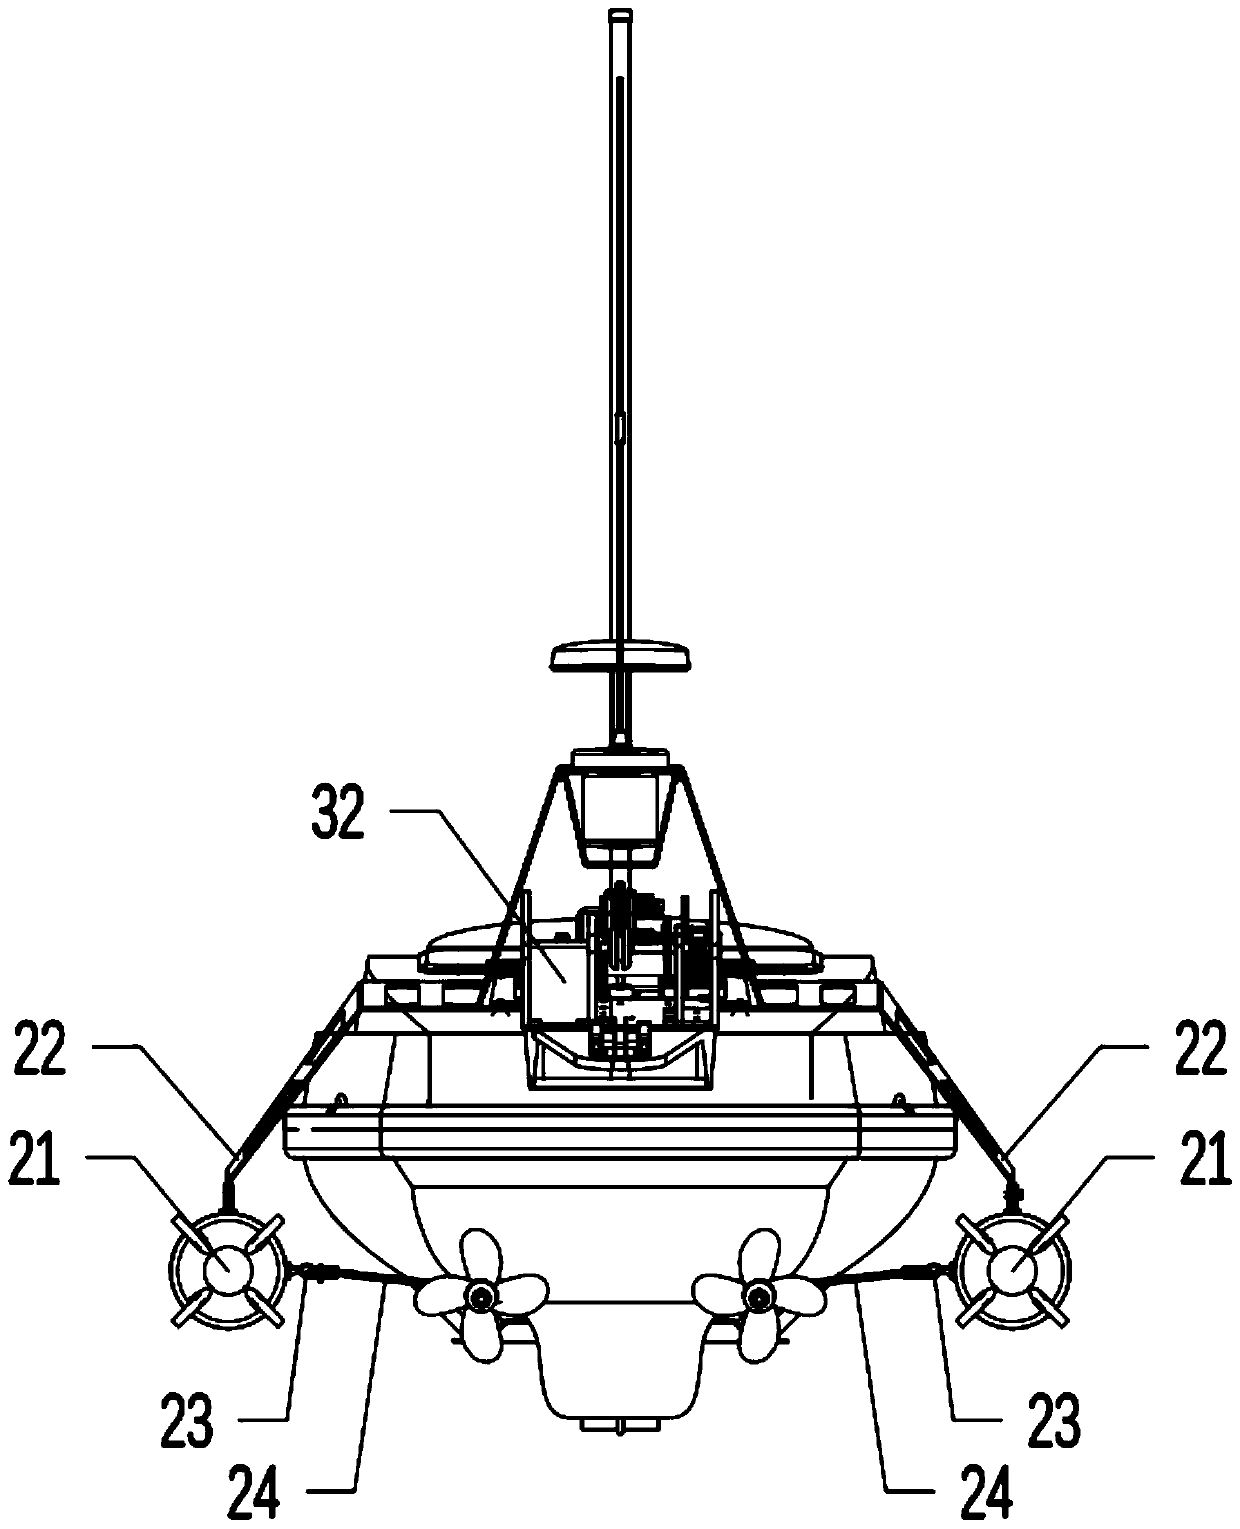 Unmanned-ship-towed underwater magnetic detection system